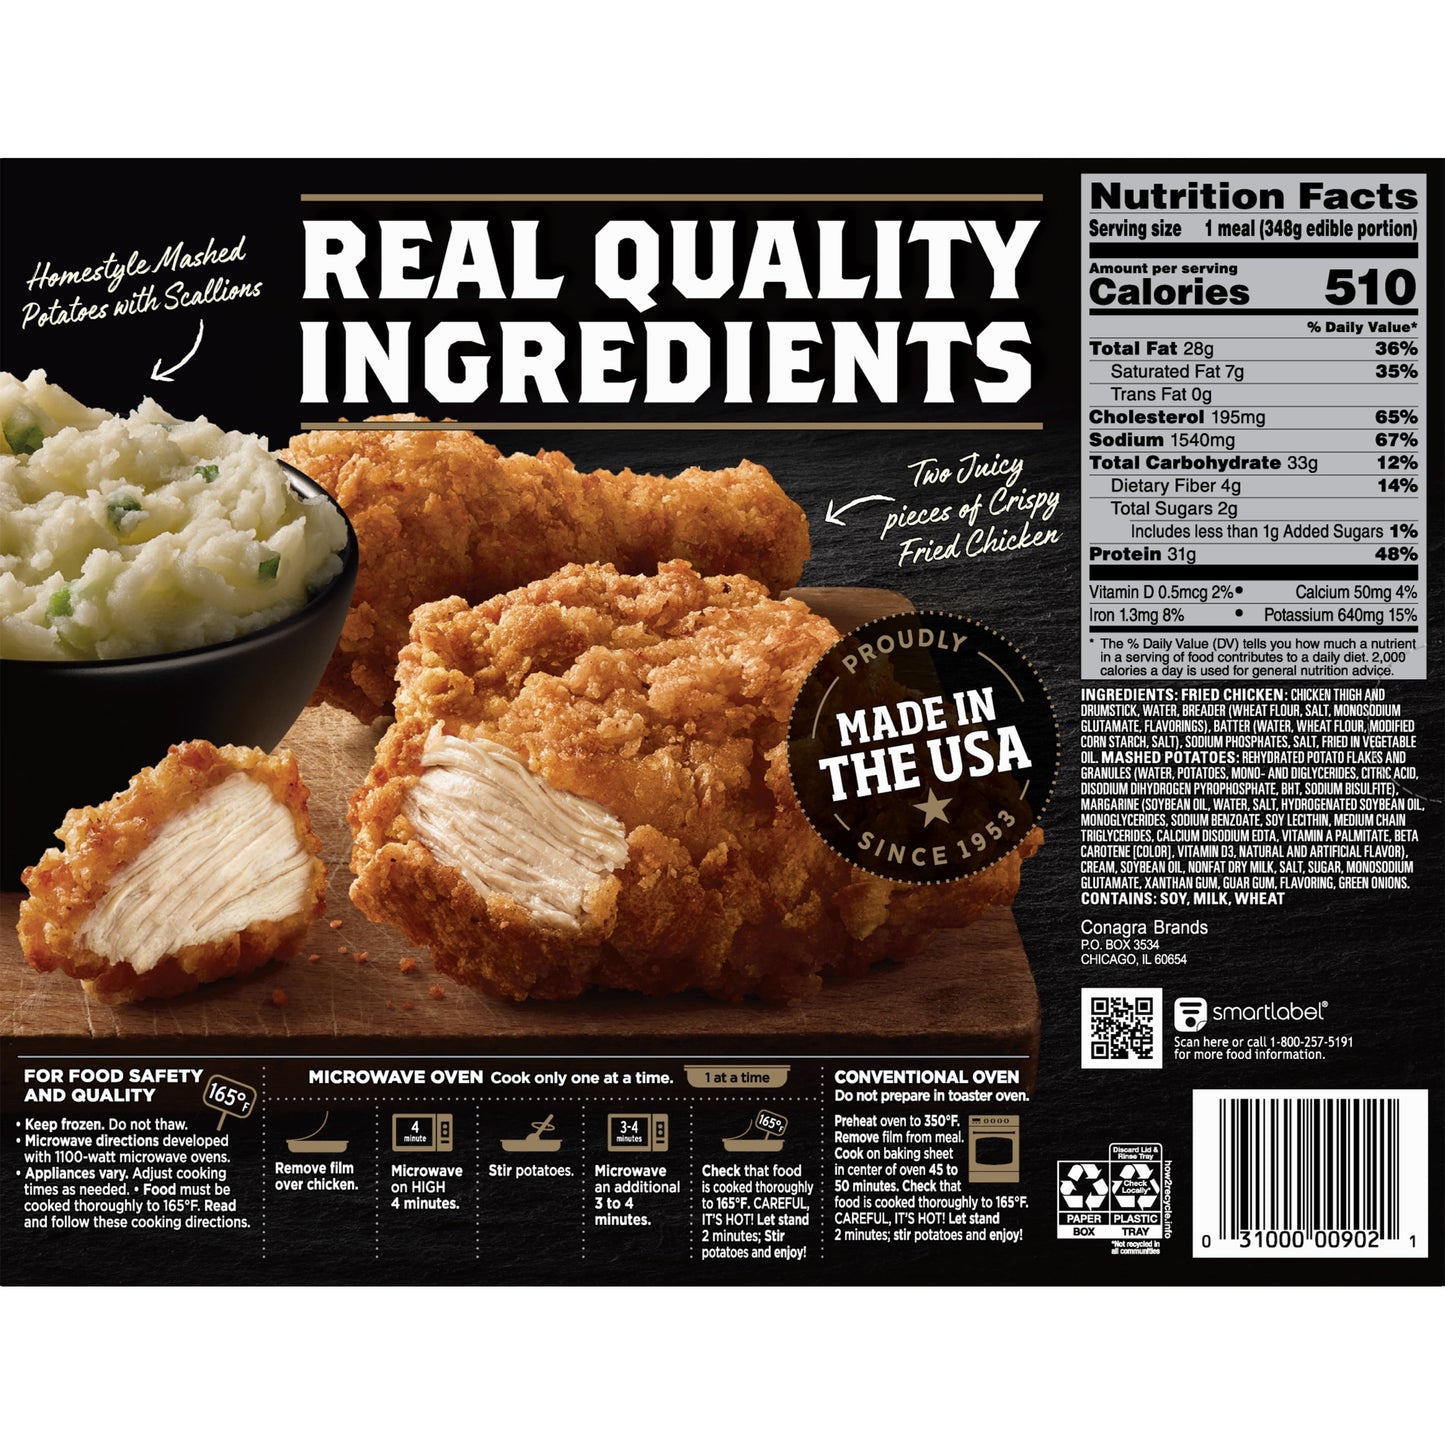 Banquet Mega Meats Original Crispy Chicken with Homestyle Mashed Potatoes Meal, 14.25 oz (Frozen)